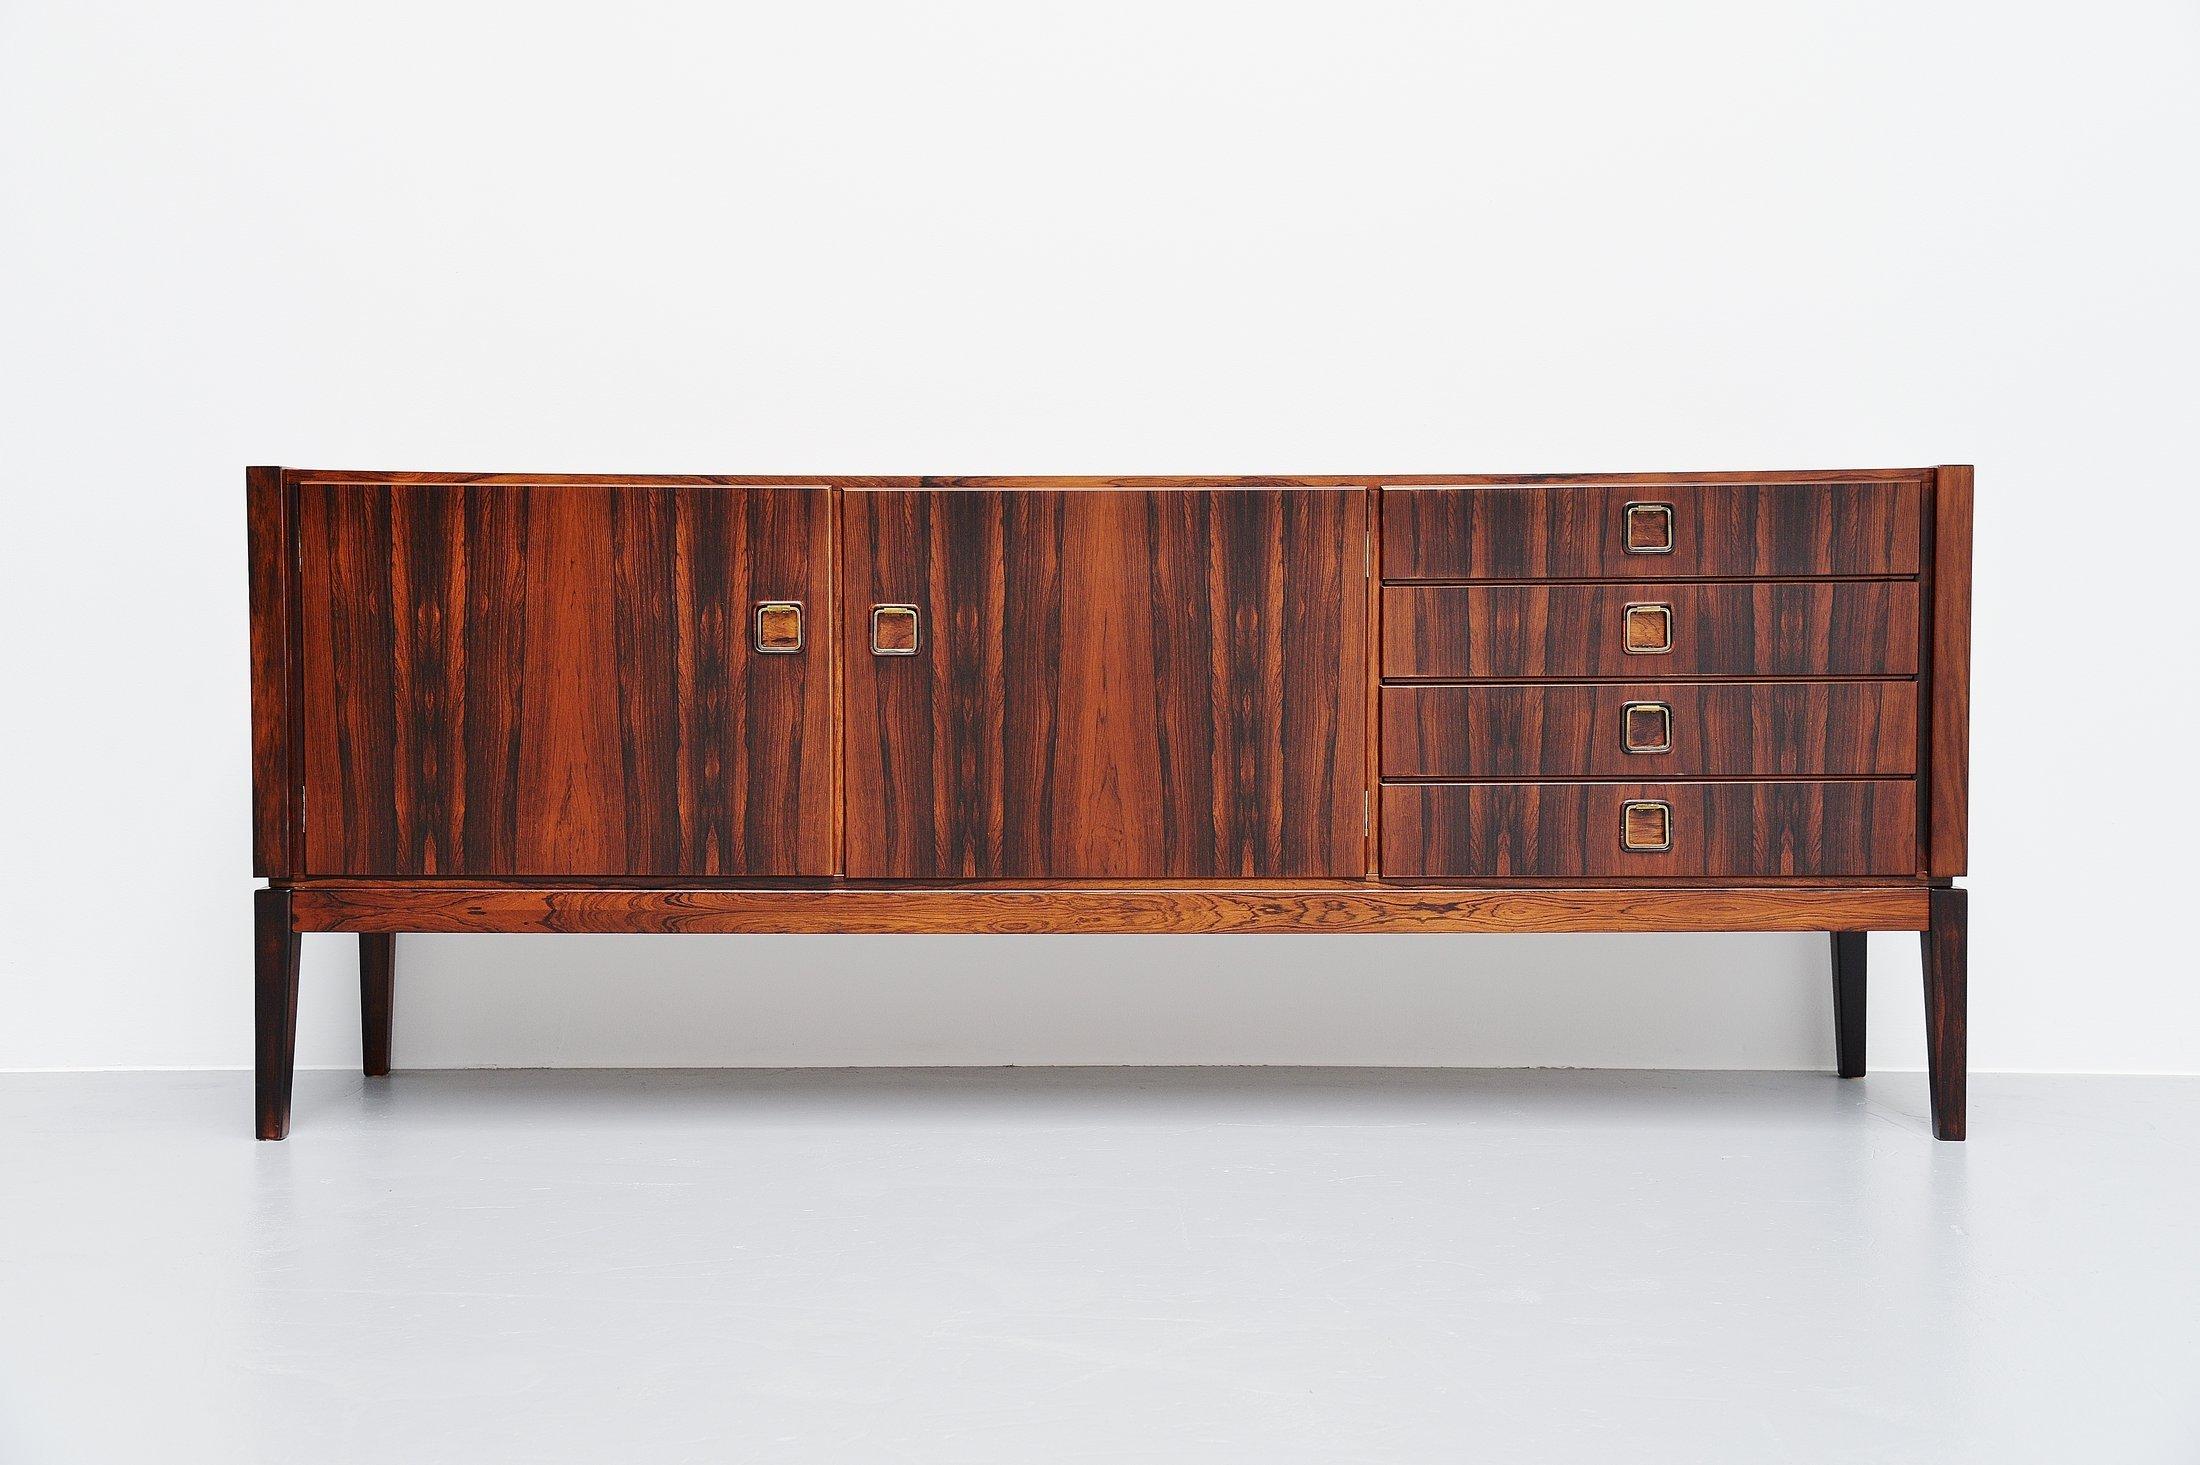 Nicely refined rosewood sideboard designed by Rudolf Bernd Glatzel and manufactured by Fristho Franeker, Holland, 1960. The sideboard has 2 folding doors with shelves behind on the left and on the right there are 4 drawers. The sideboard is fully